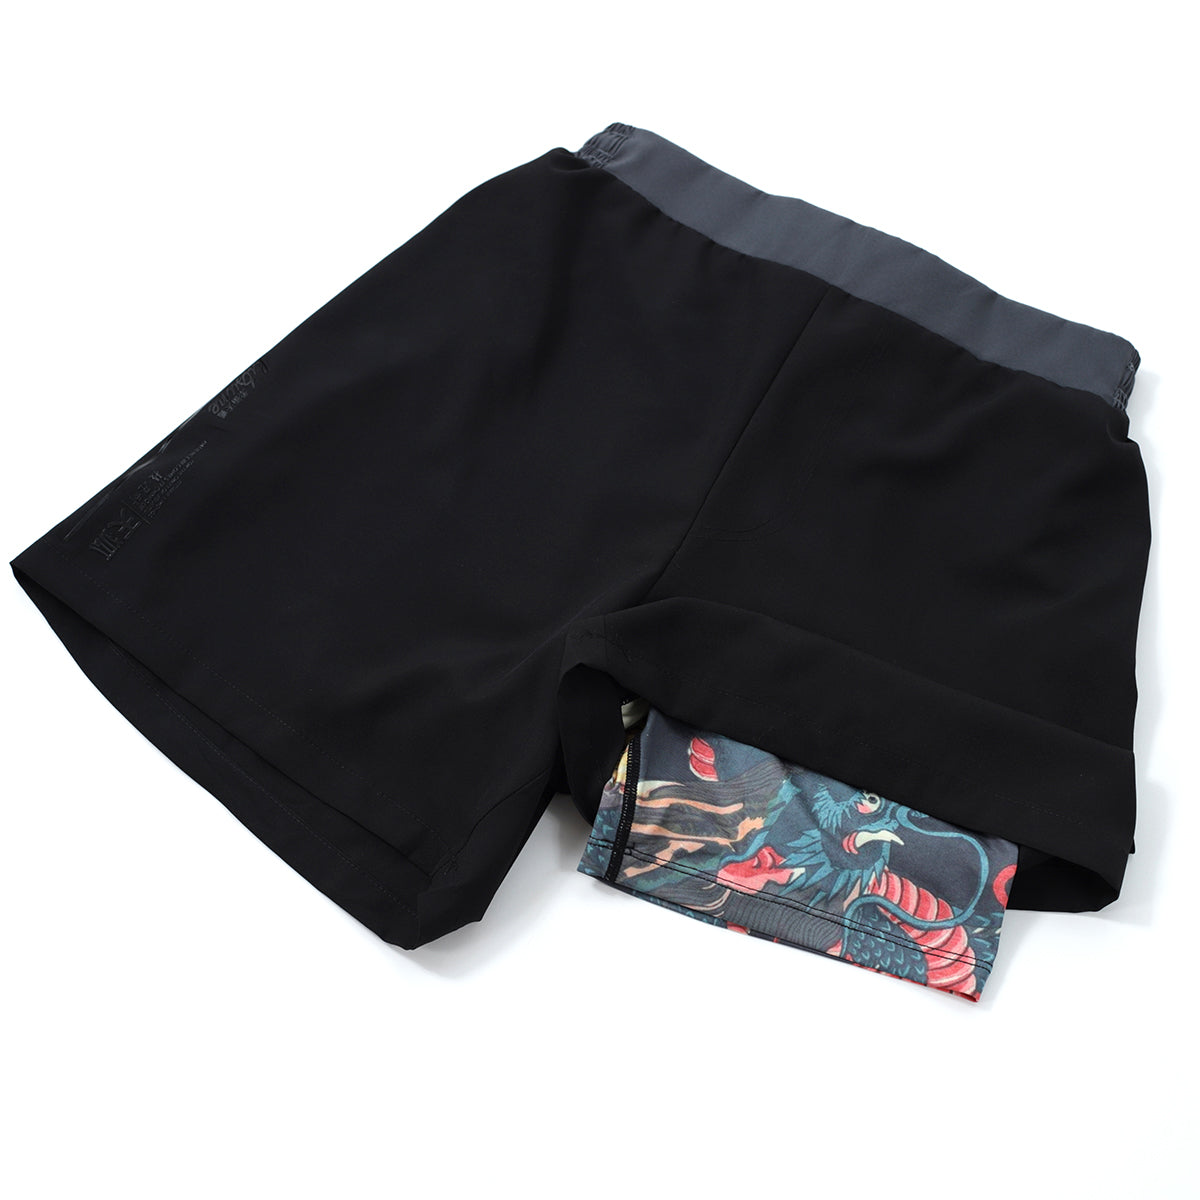 Kitsune "Red Skies" Compression-Lined Shorts